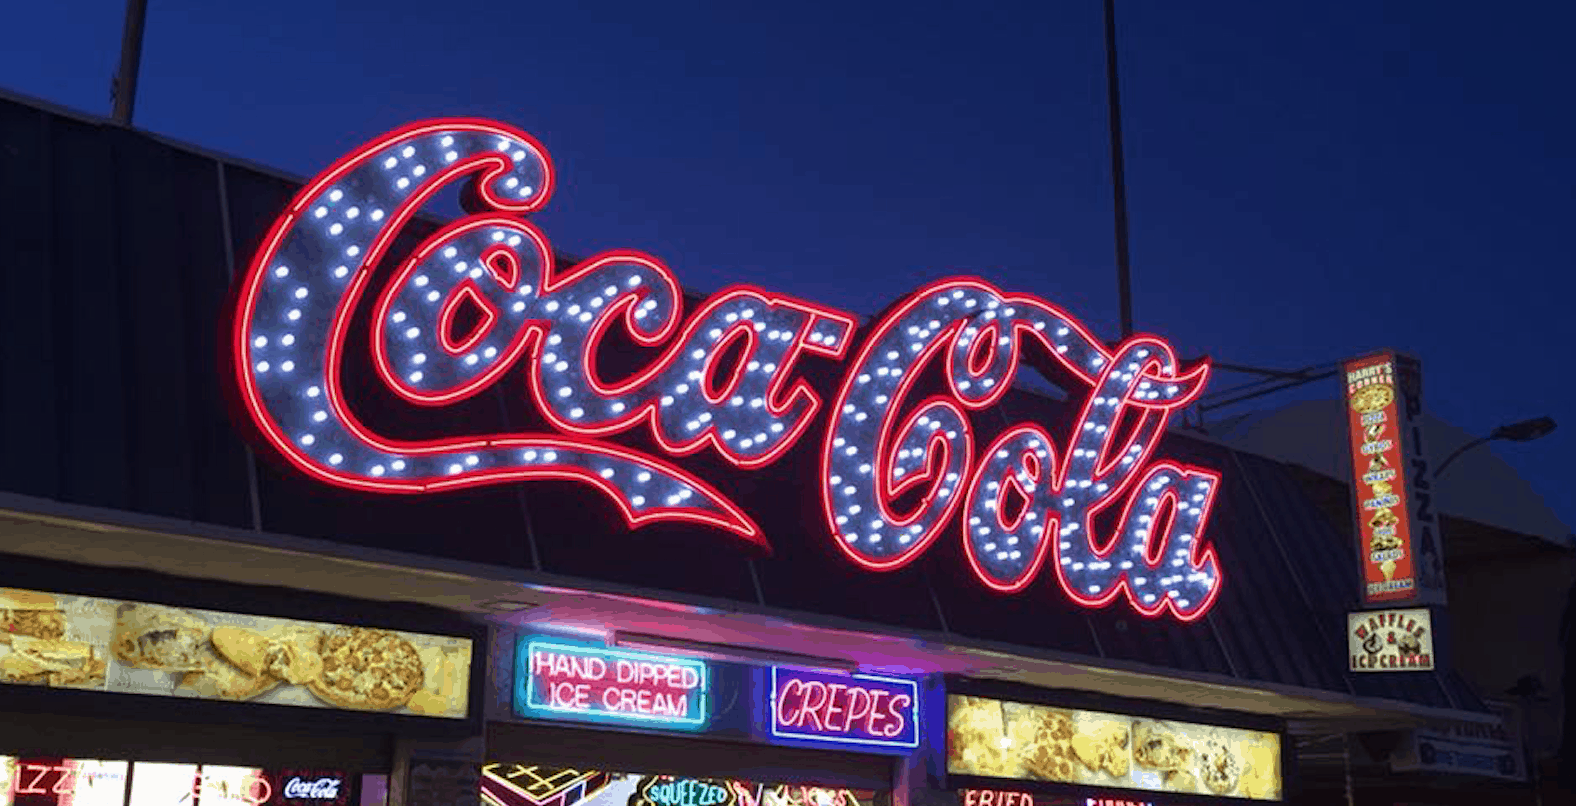 Relighting The Coca-Cola Sign